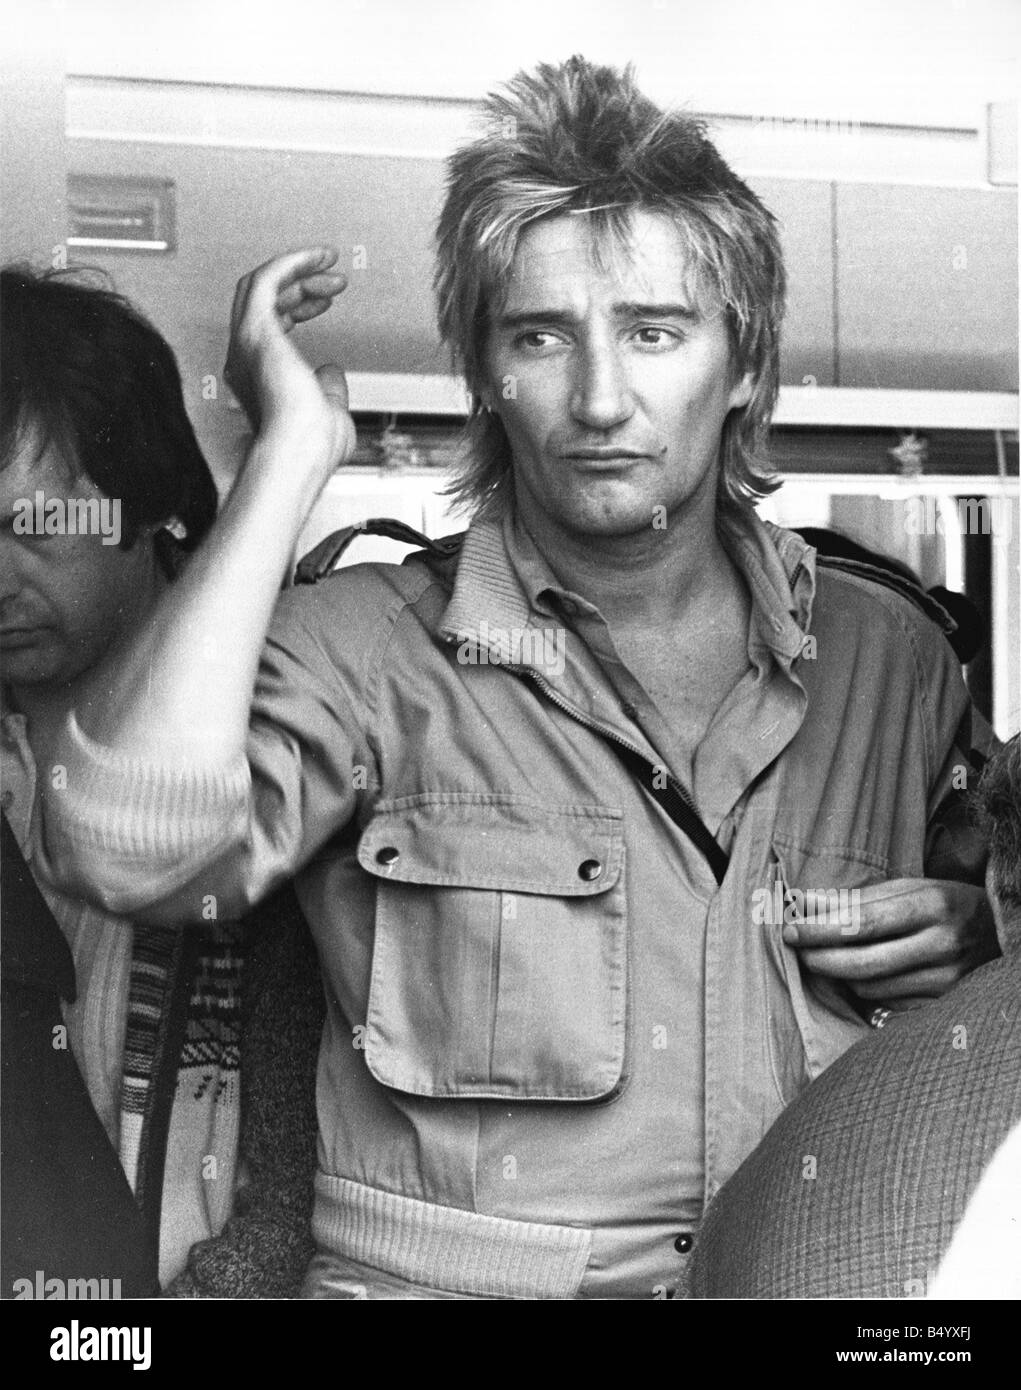 Rod Stewart a fanatical soccer fan was at Hampden Park in Glasgow on 24th May 1980 to watch Scotland get beaten 2 0 by England in the Home Championships Singer Musician Rock Star 1980s Stock Photo